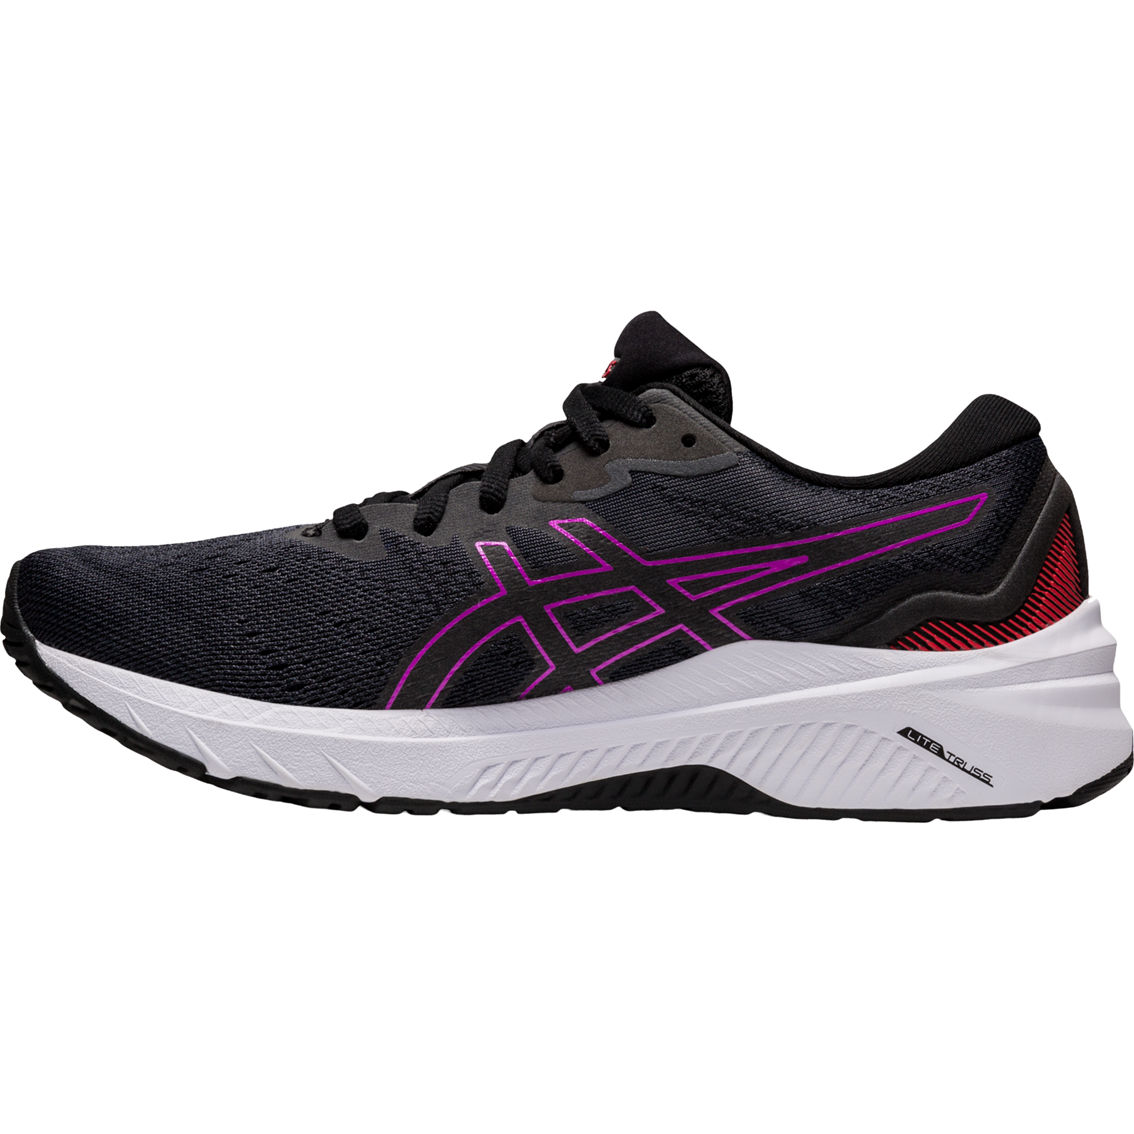 ASICS Women's GT-1000 11 Running Shoes - Image 3 of 6